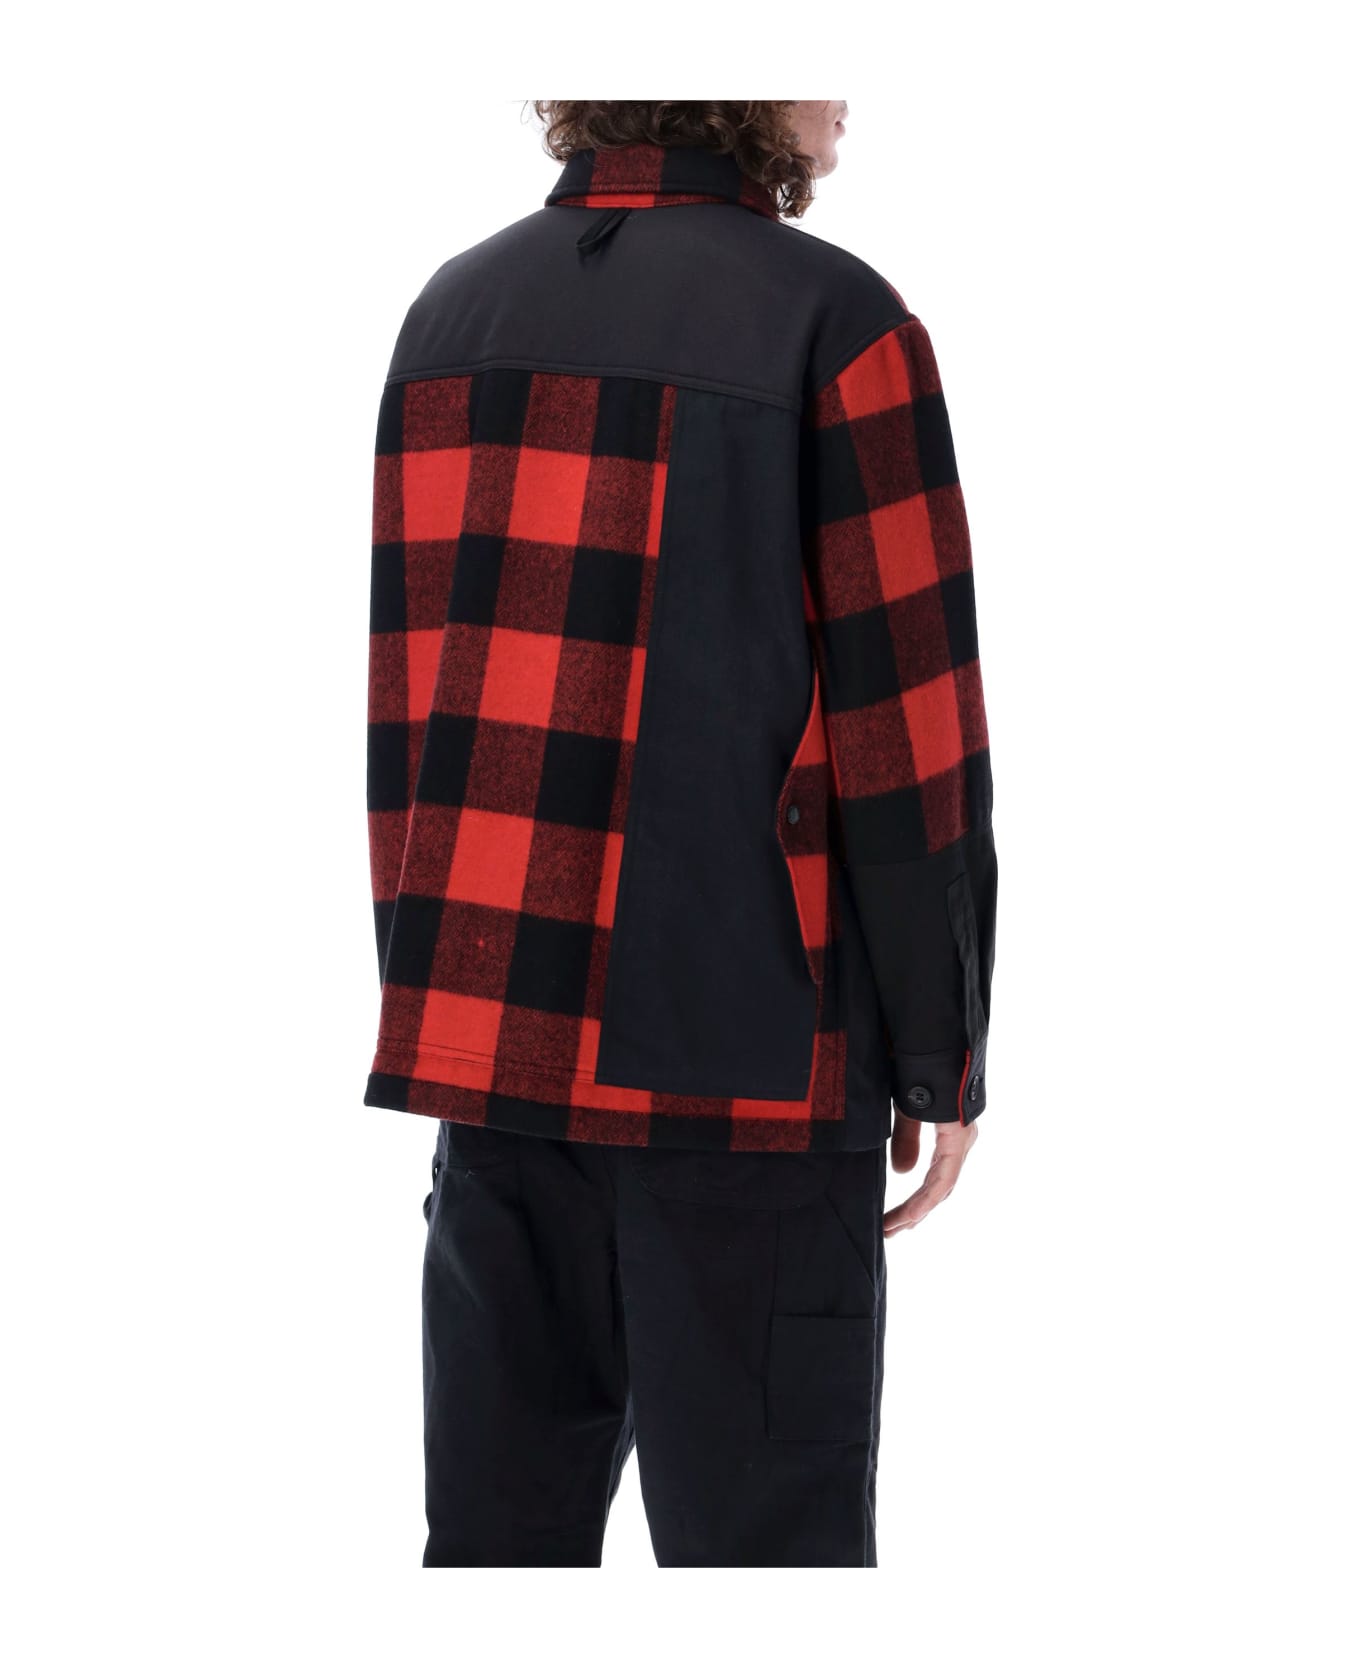 Comme des Garçons Homme Shirt Jacket Check Red - RED CHECK